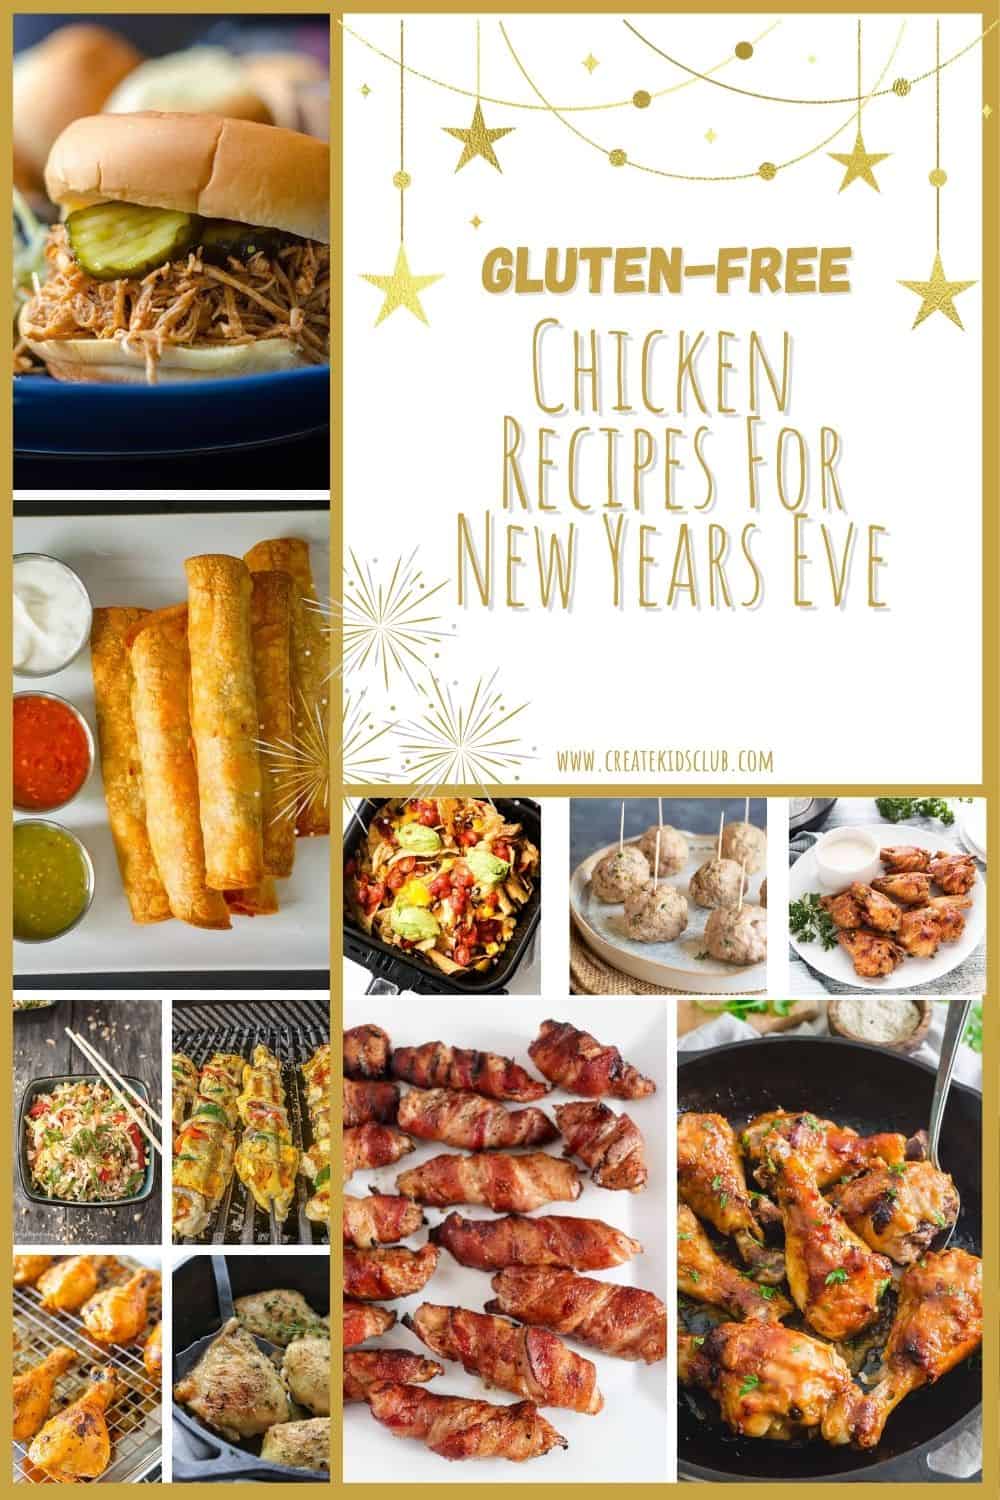 11 pictures of gluten free chicken recipes for New Years eve.